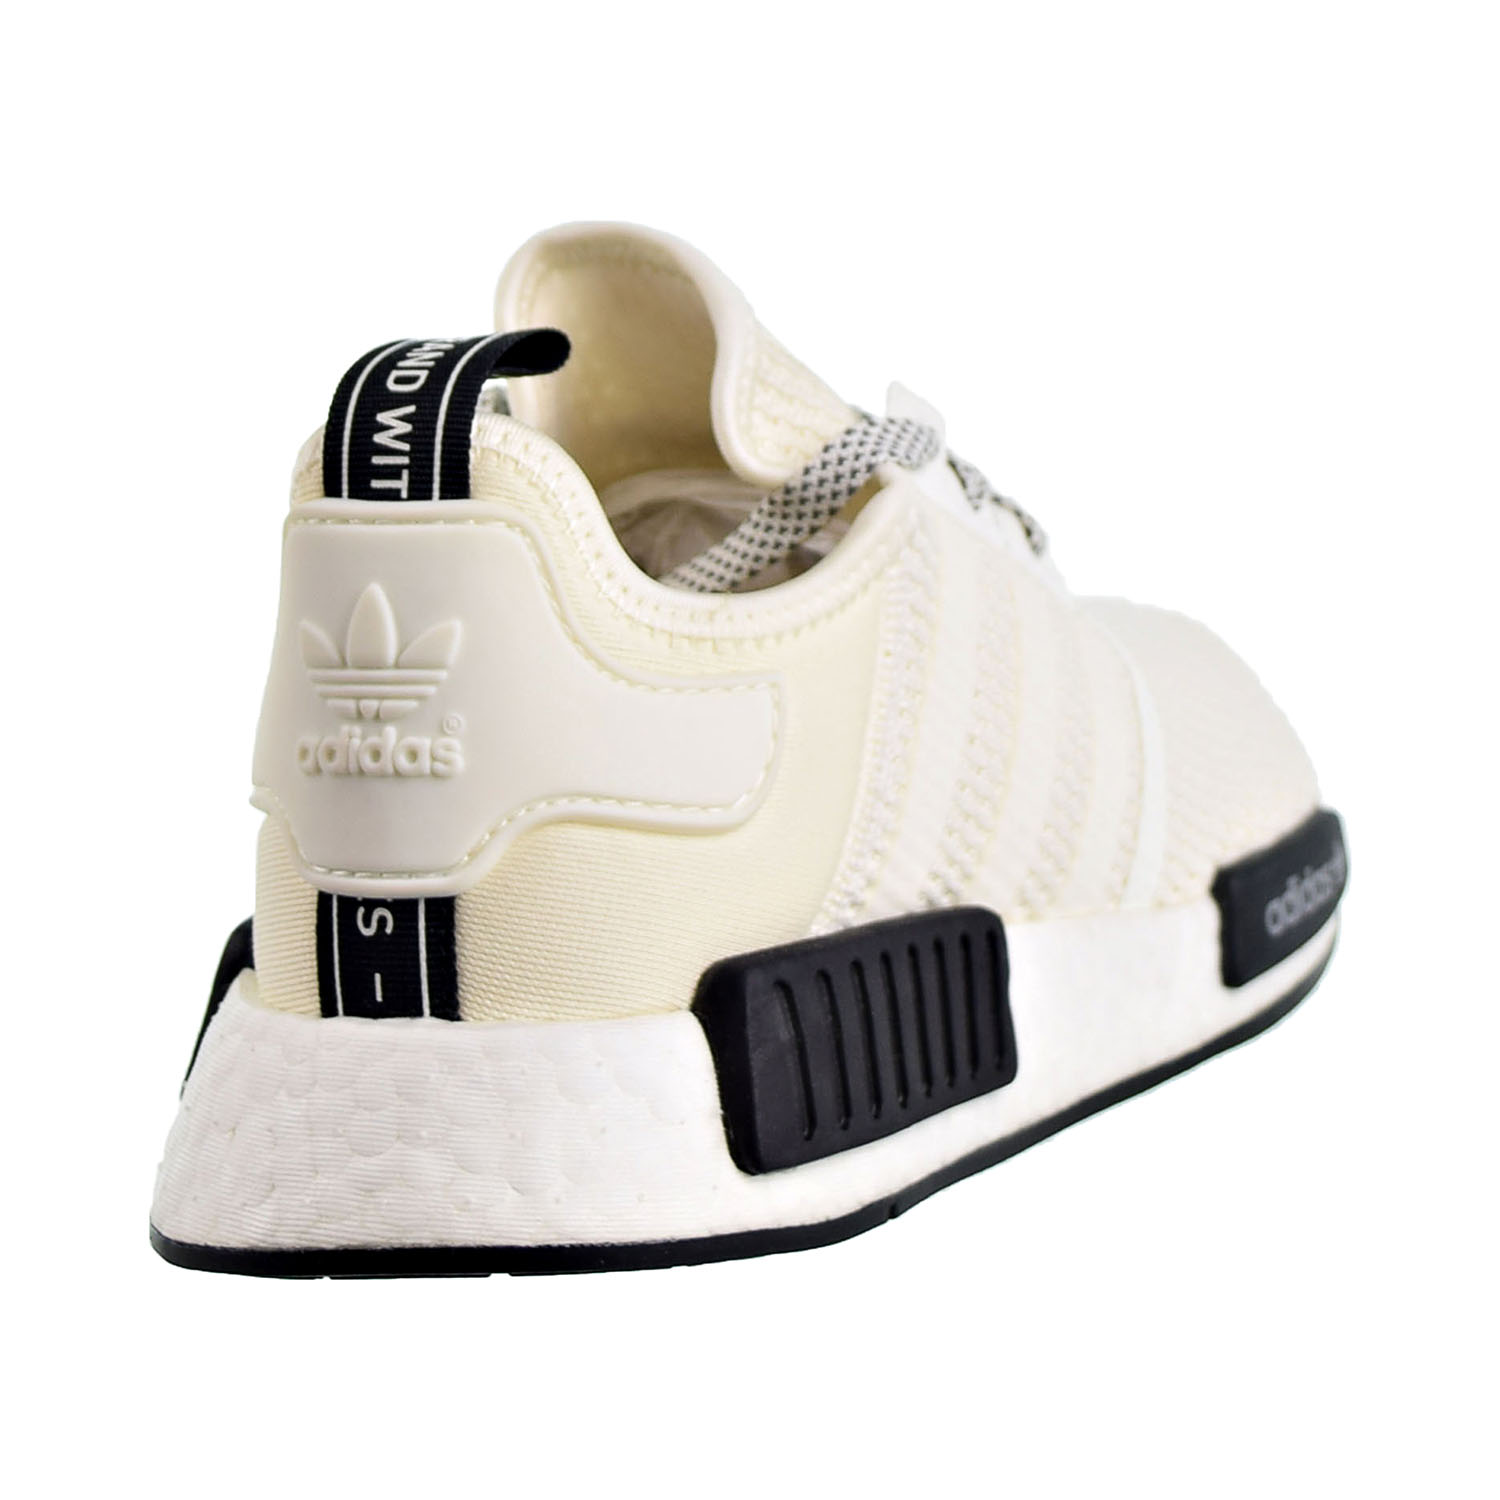 nmd off white carbon